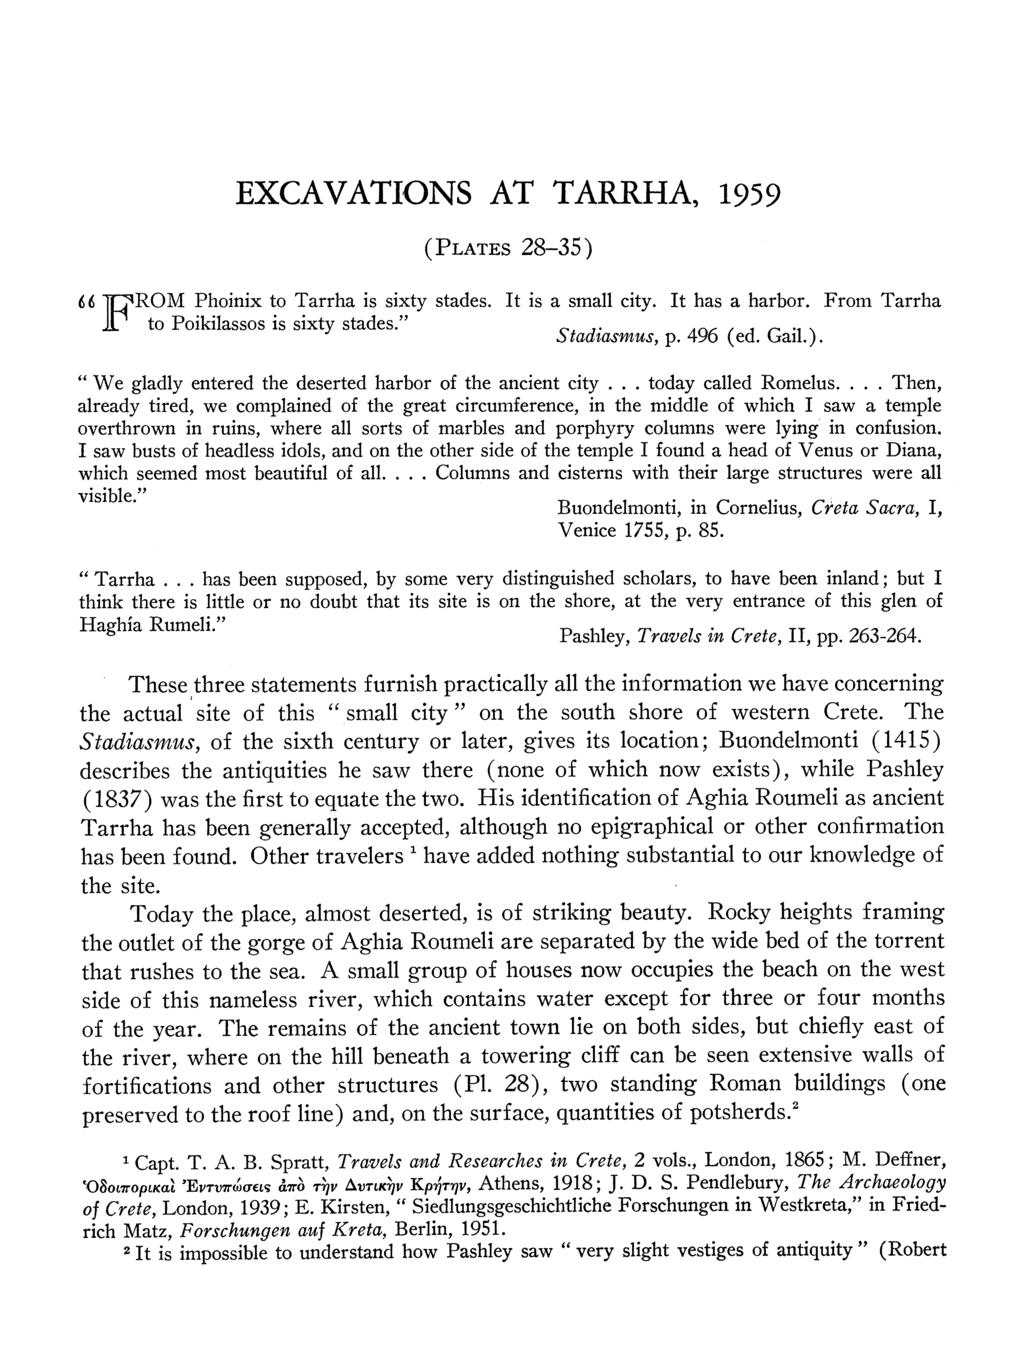 EXCAVATIONS AT TARRHA, 1959 (PLATES 28-35) 66 TROM Phoinix to Tarrha is sixty stades. It is a small city. It has a harbor. From Tarrha?1 to Poikilassos is sixty stades." Stadiasmus, p. 496 (ed. Gail.